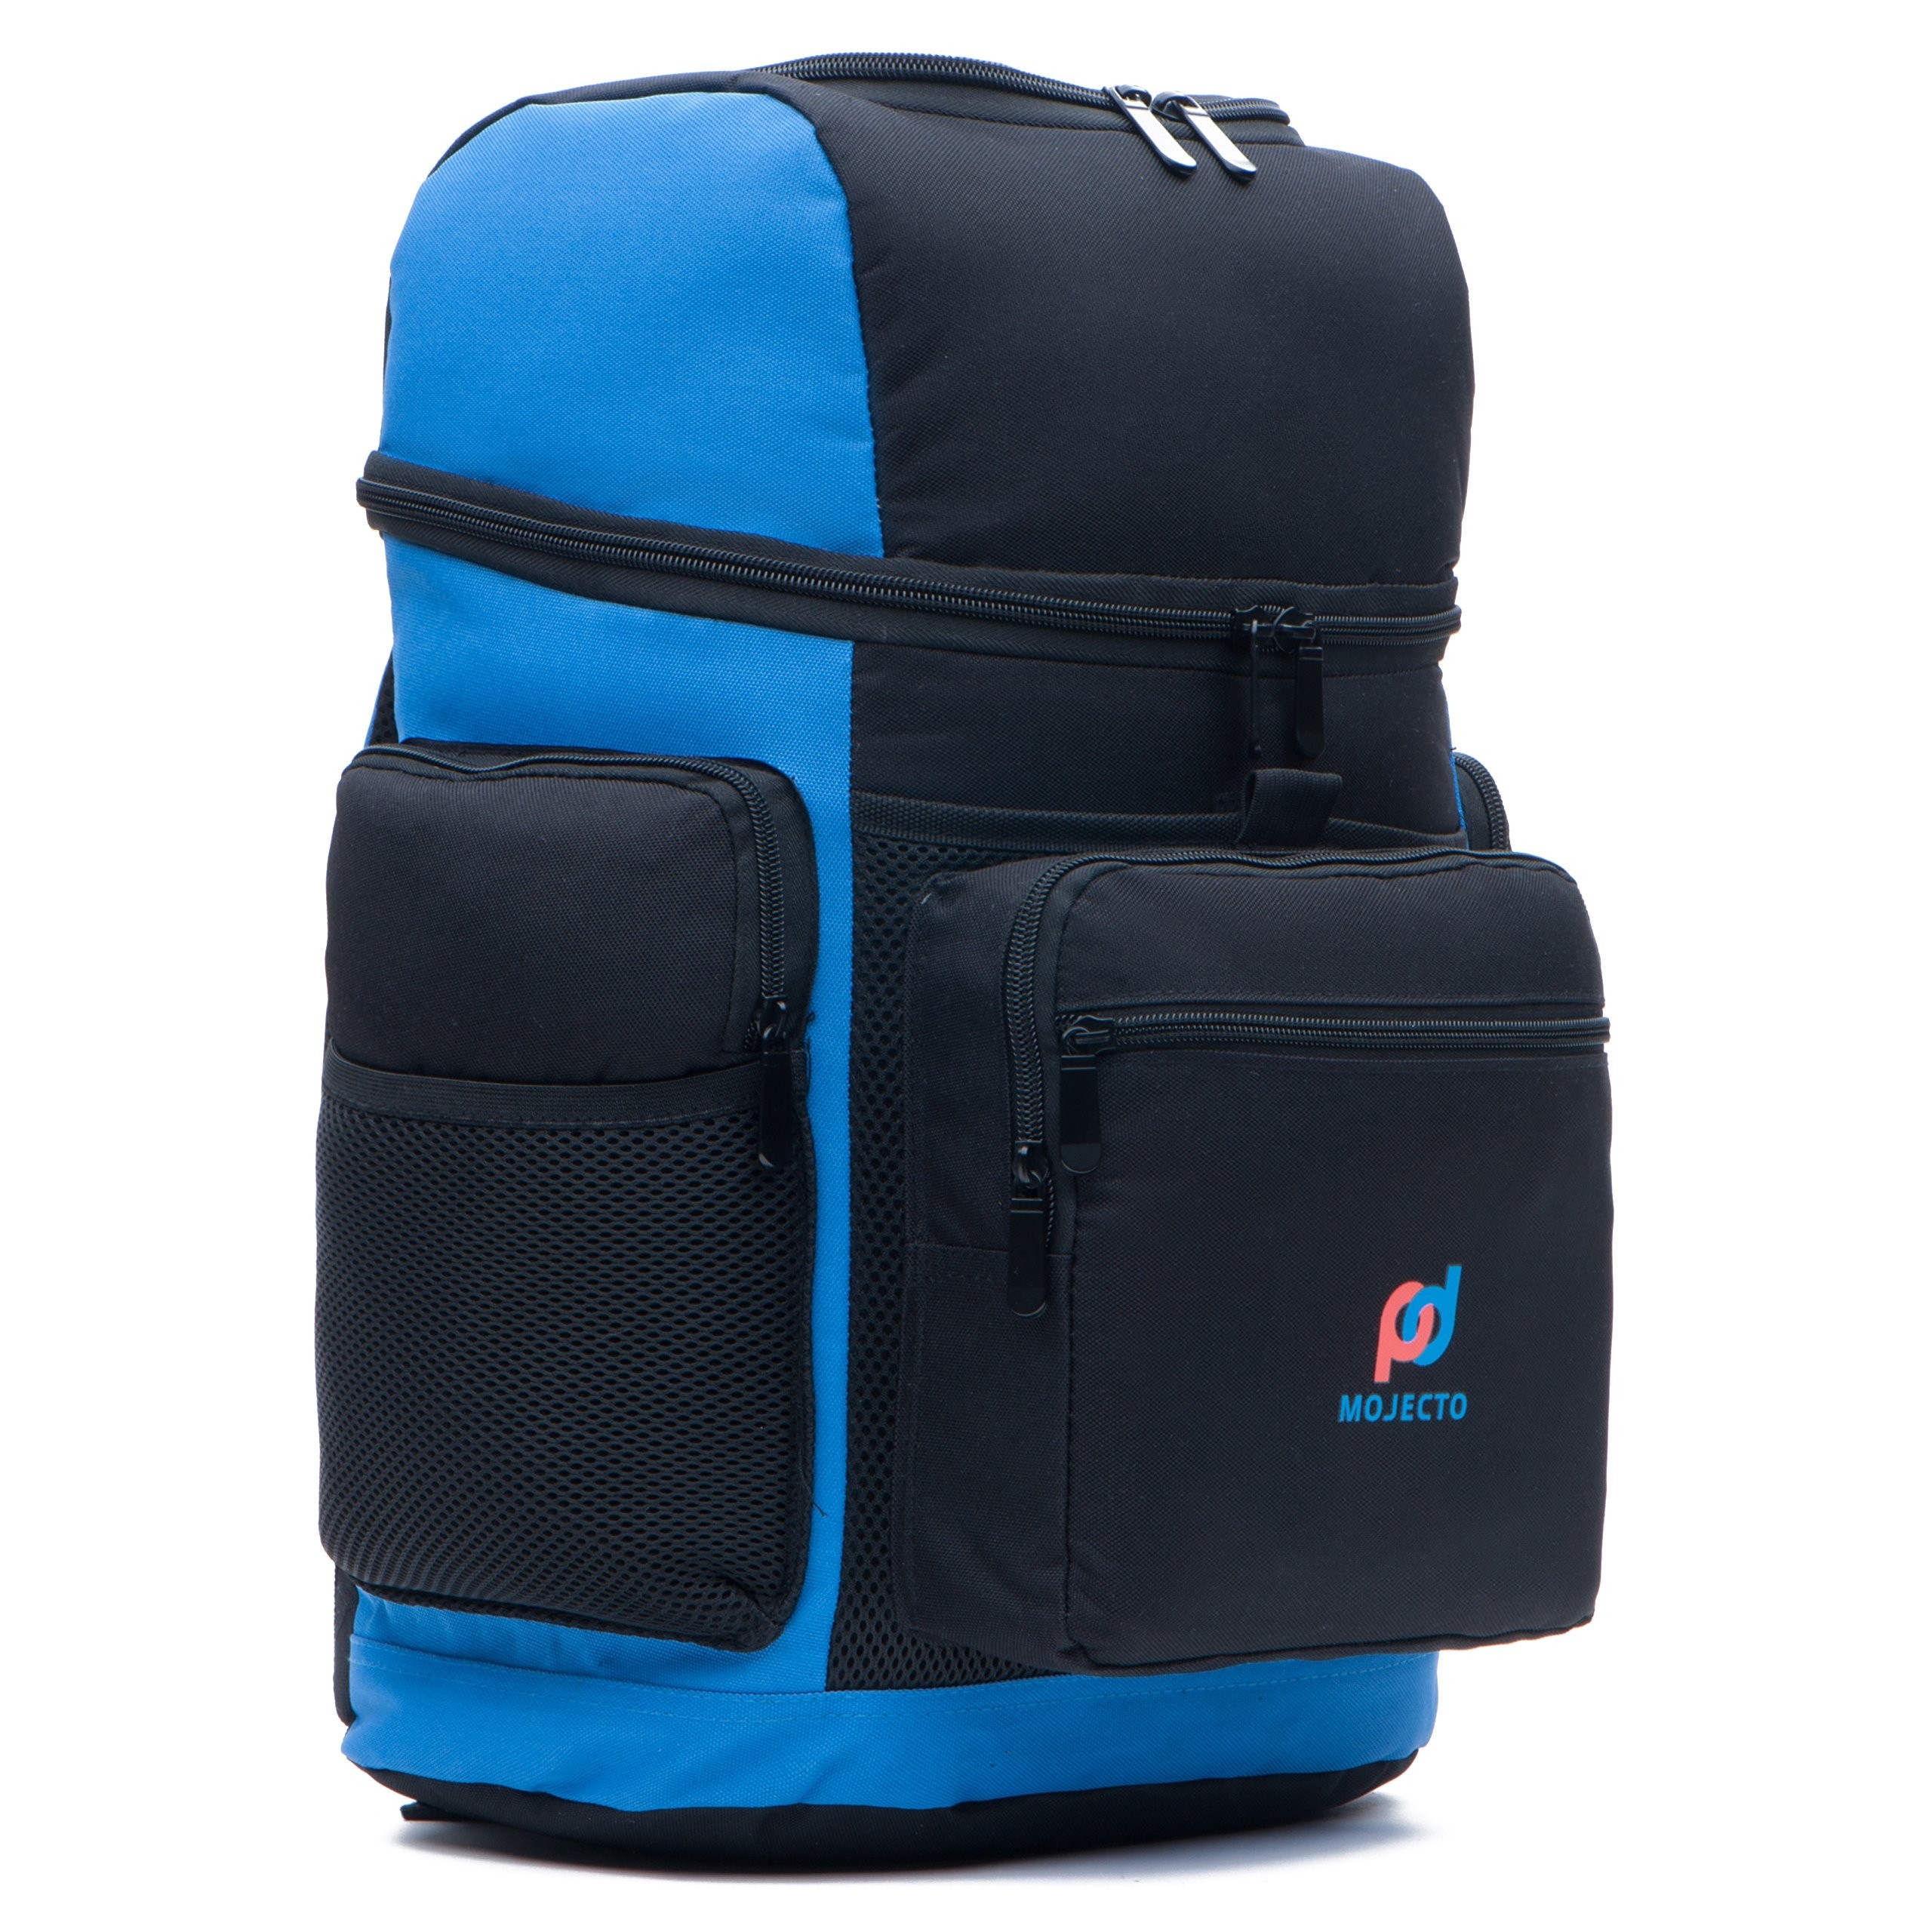 Cooler backpack bag dual insulated compartment multiple